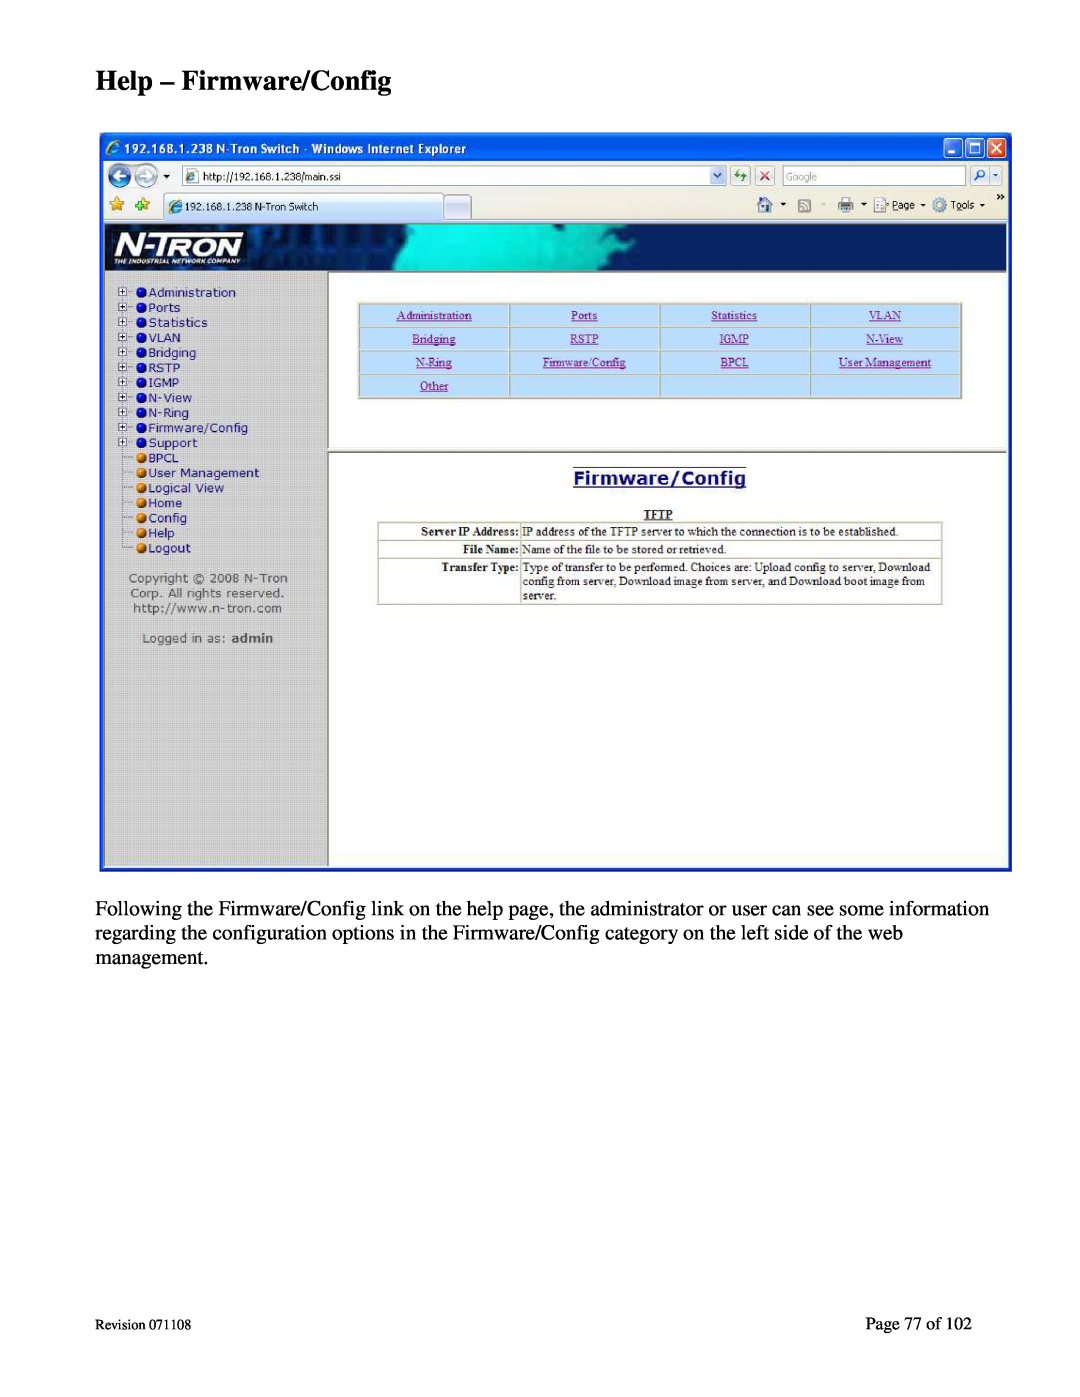 N-Tron 708M12 user manual Help - Firmware/Config, Page 77 of, Revision 